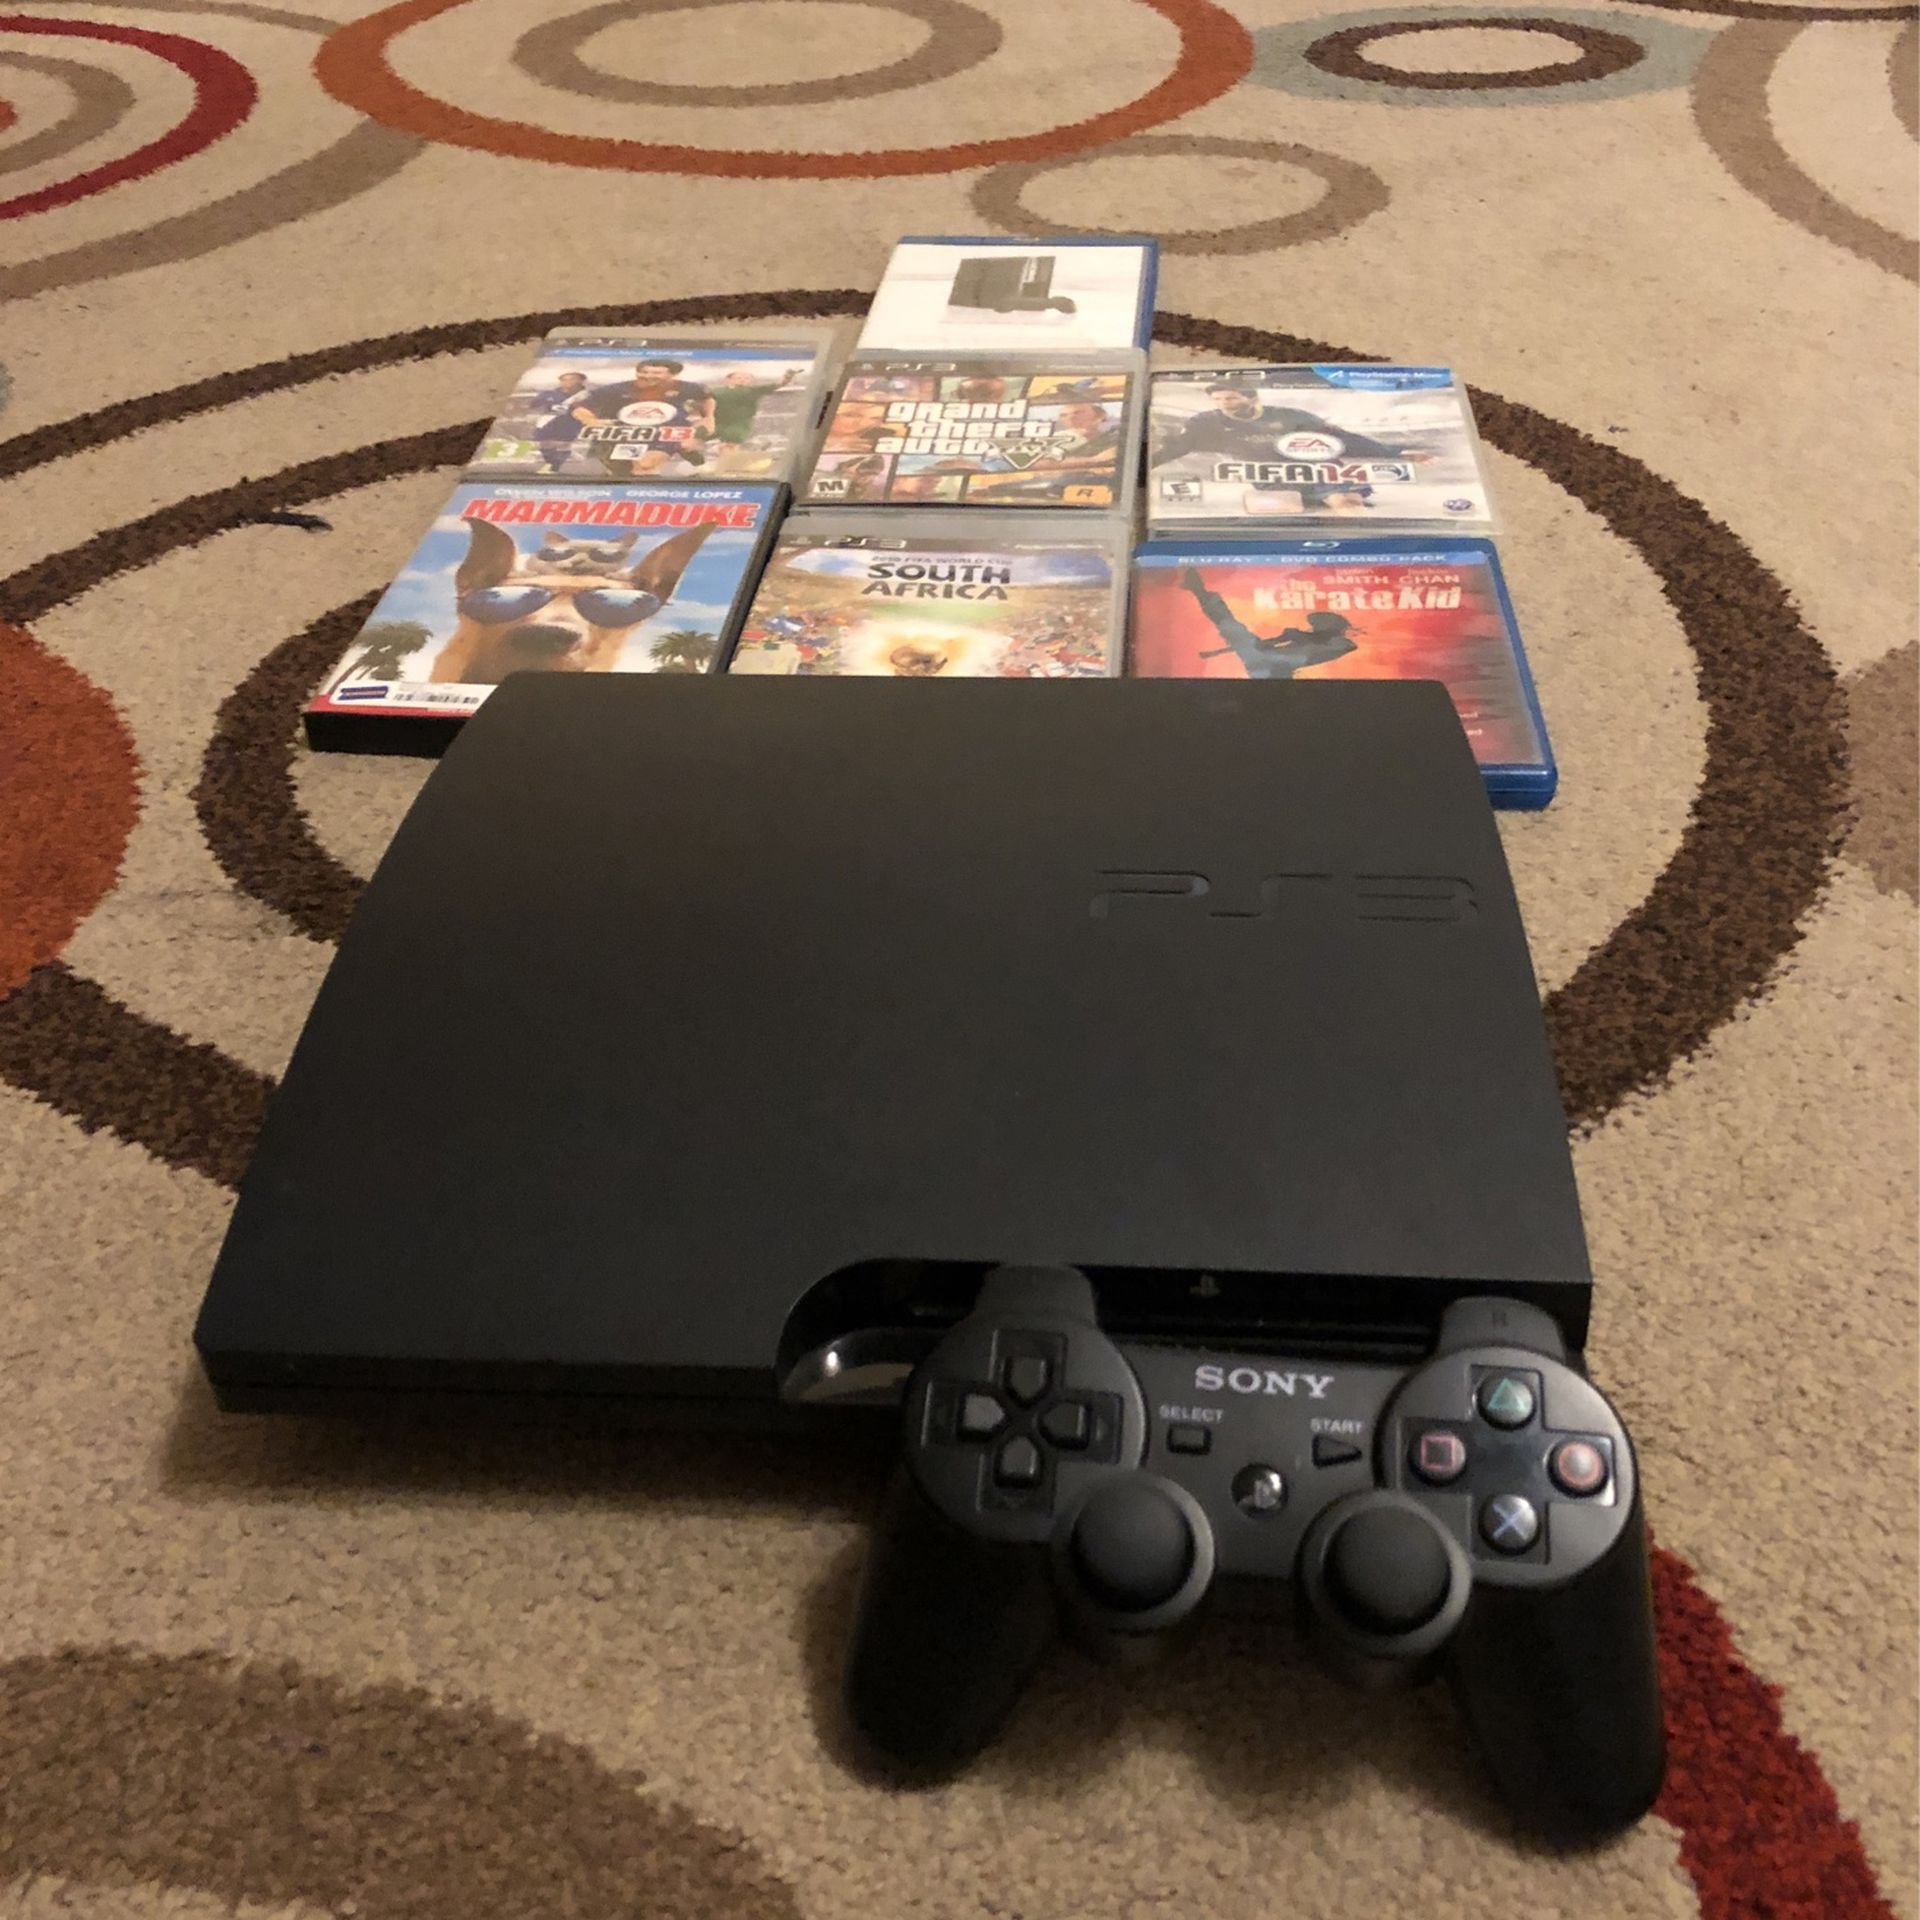 PS3 With Games And two Movies I Have One More Controller That’s Not In The Photo